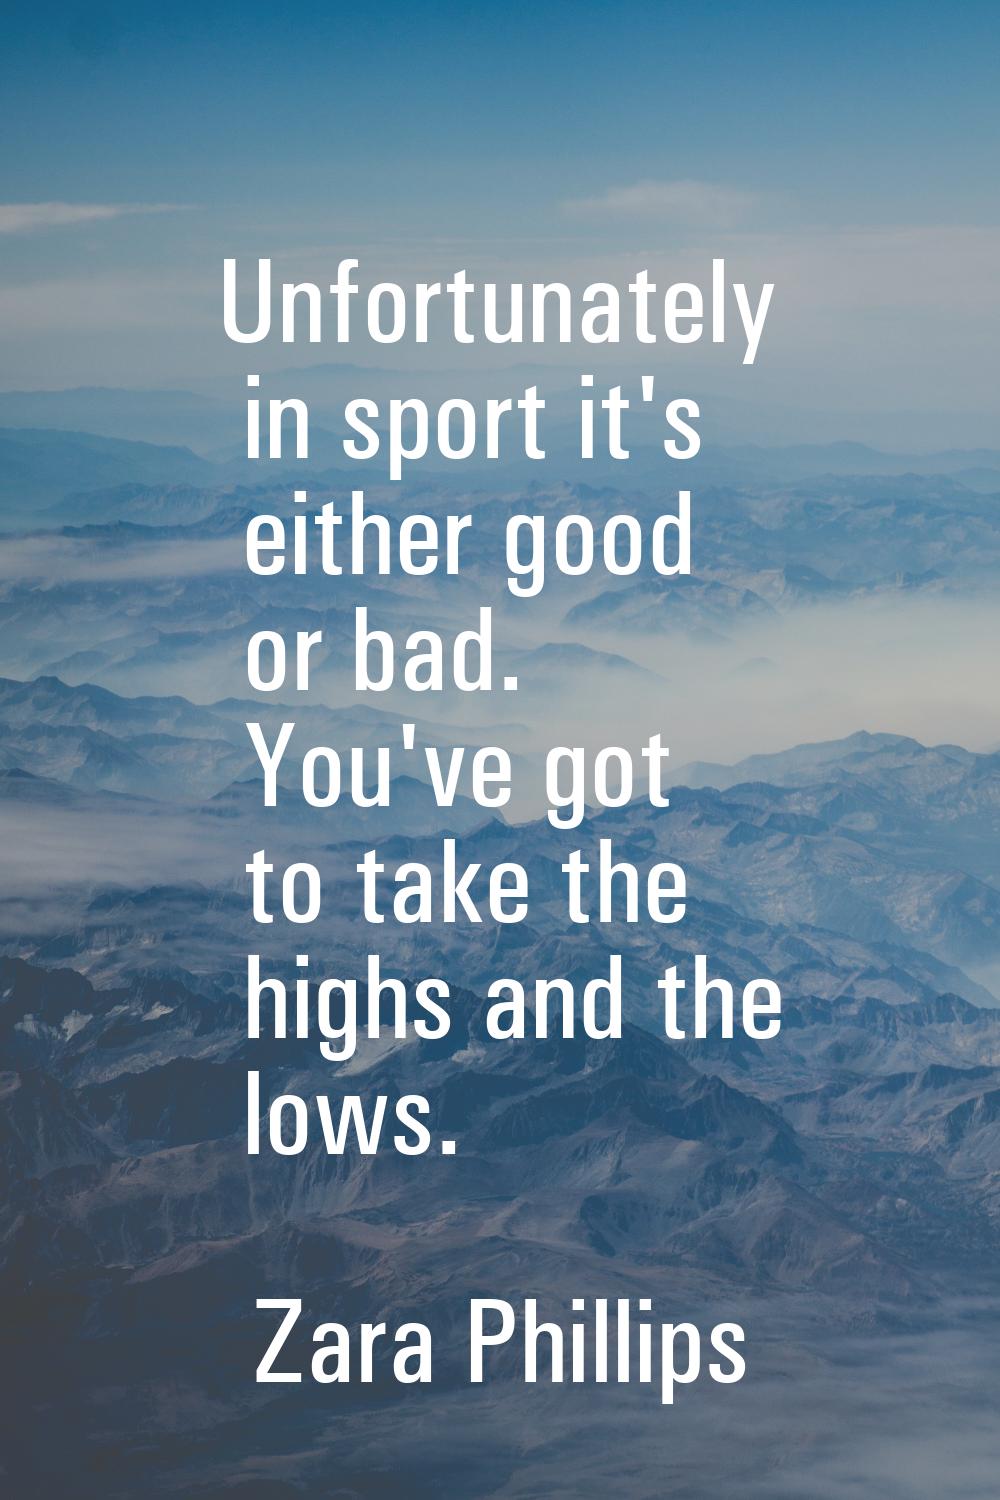 Unfortunately in sport it's either good or bad. You've got to take the highs and the lows.